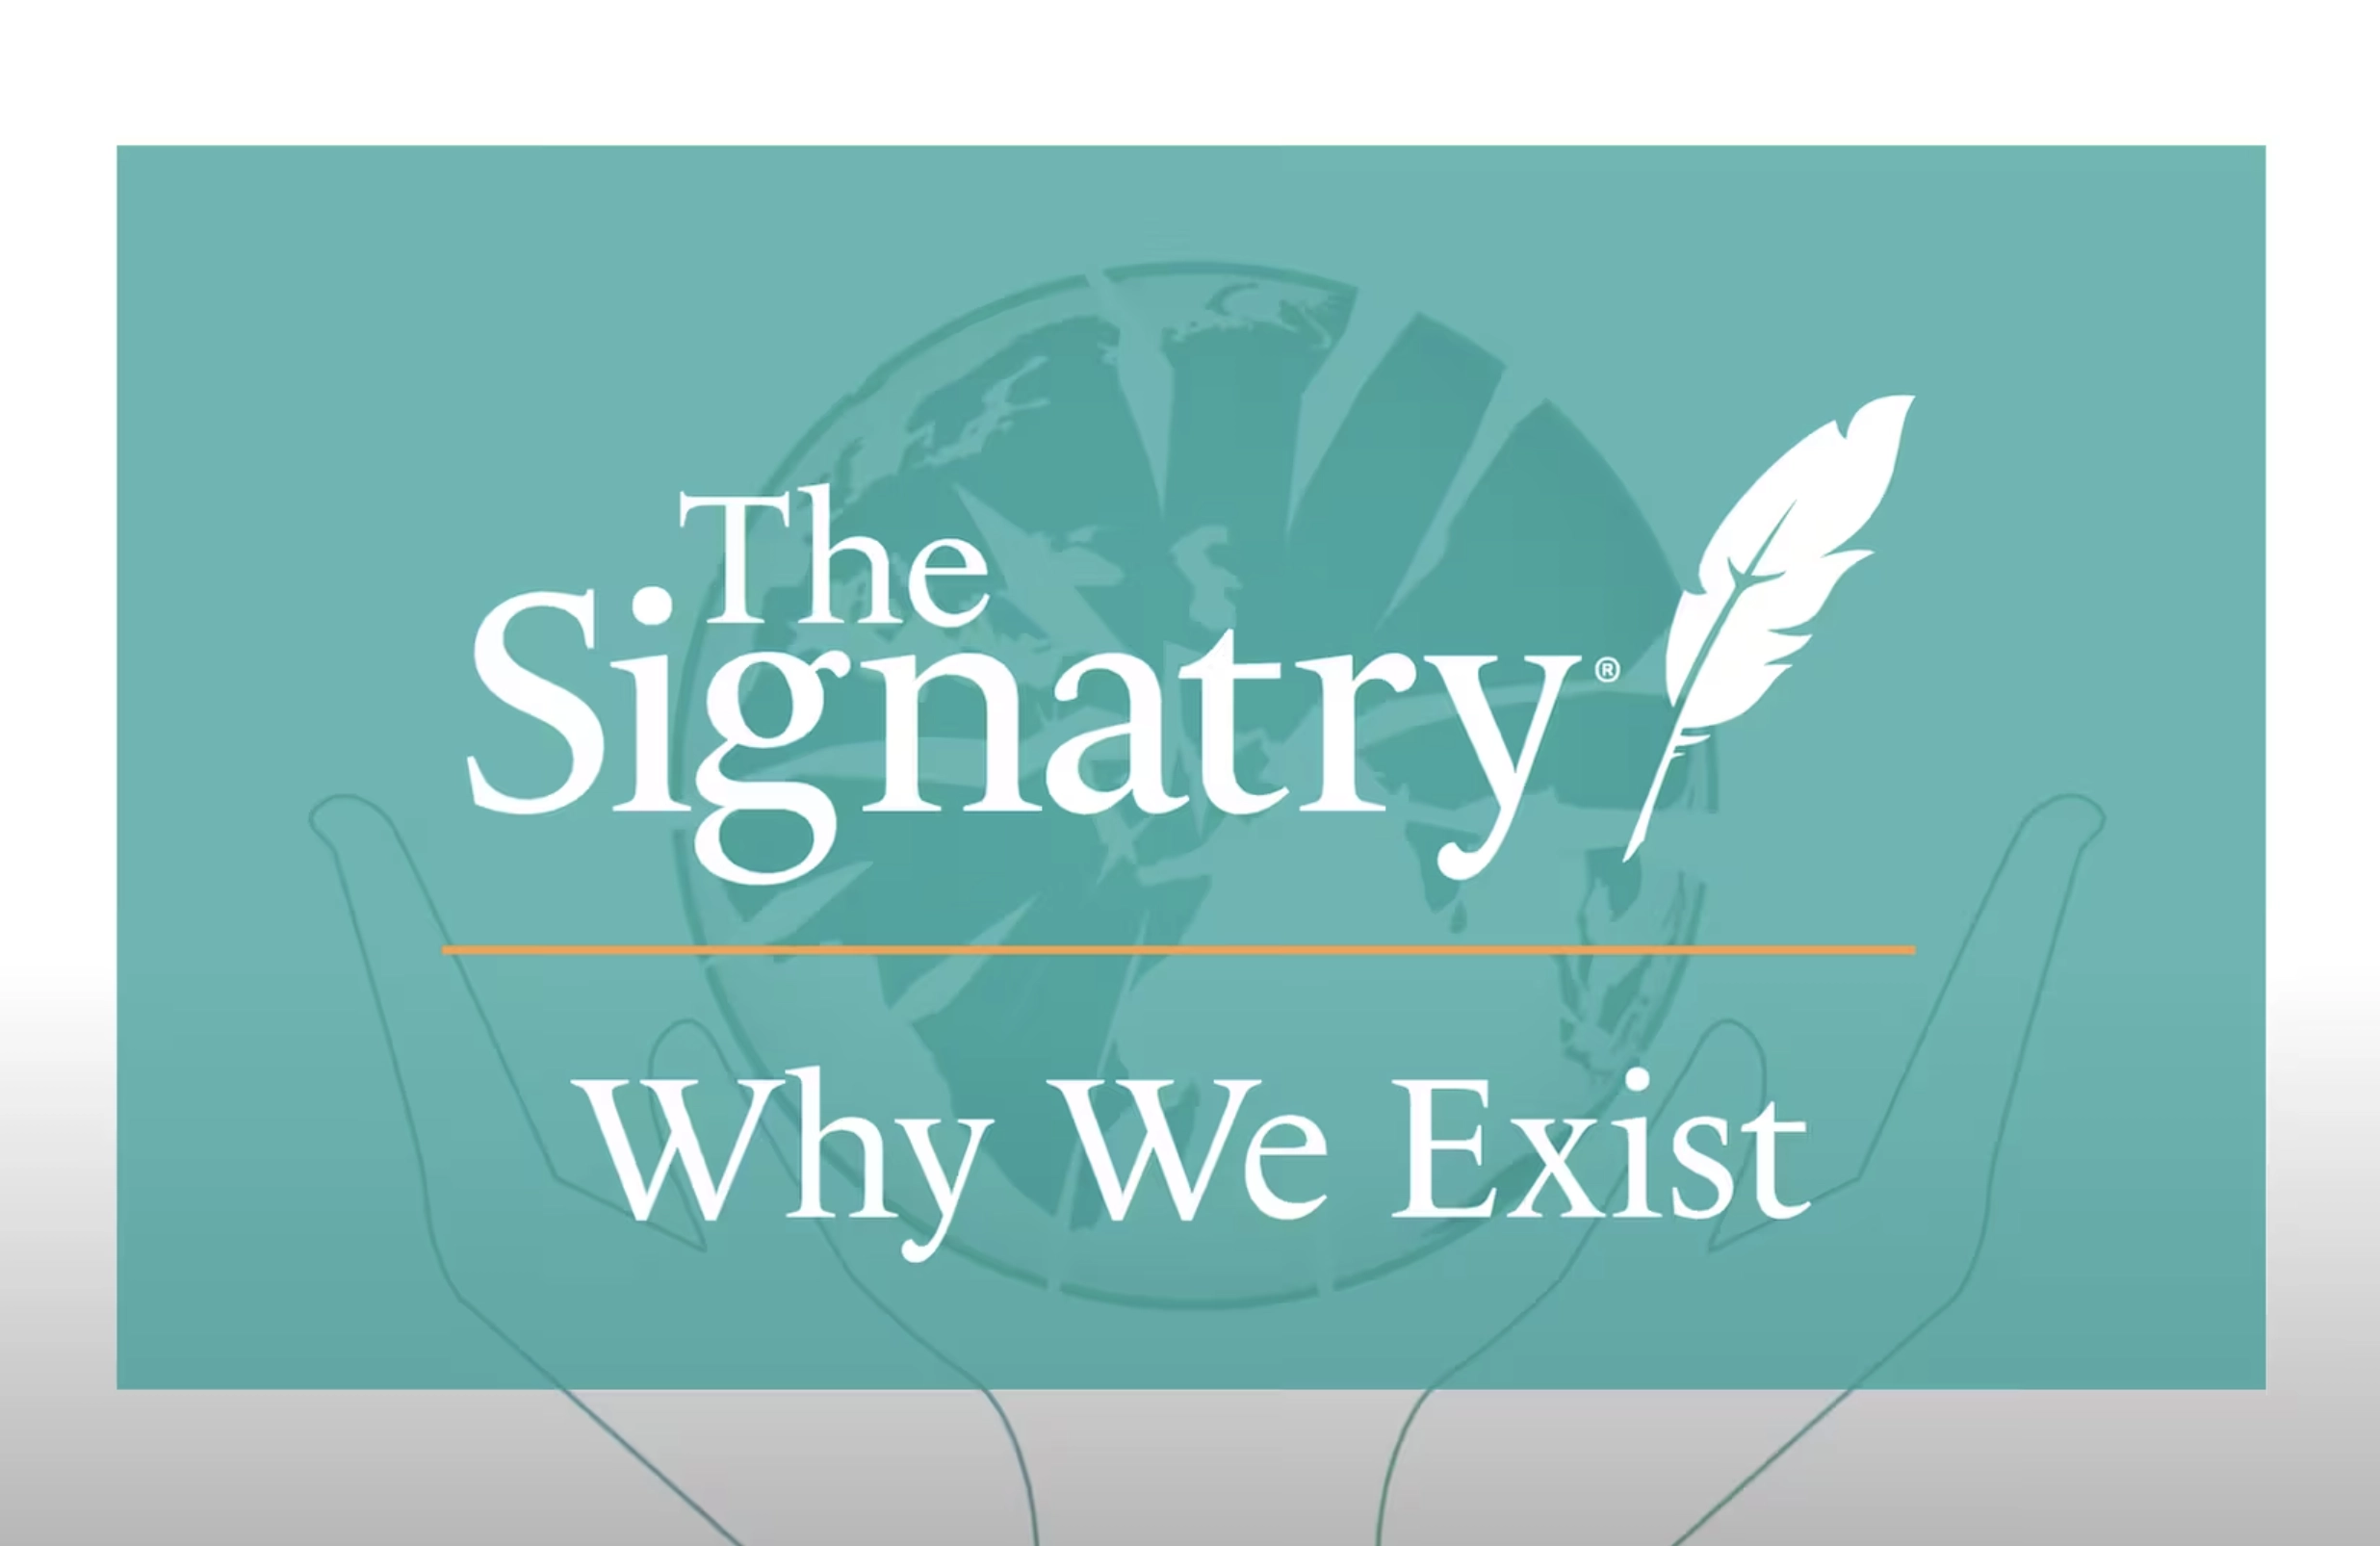 The words "Why We Exist" and the logo of The Signatry overlayed on a globe held between two hands